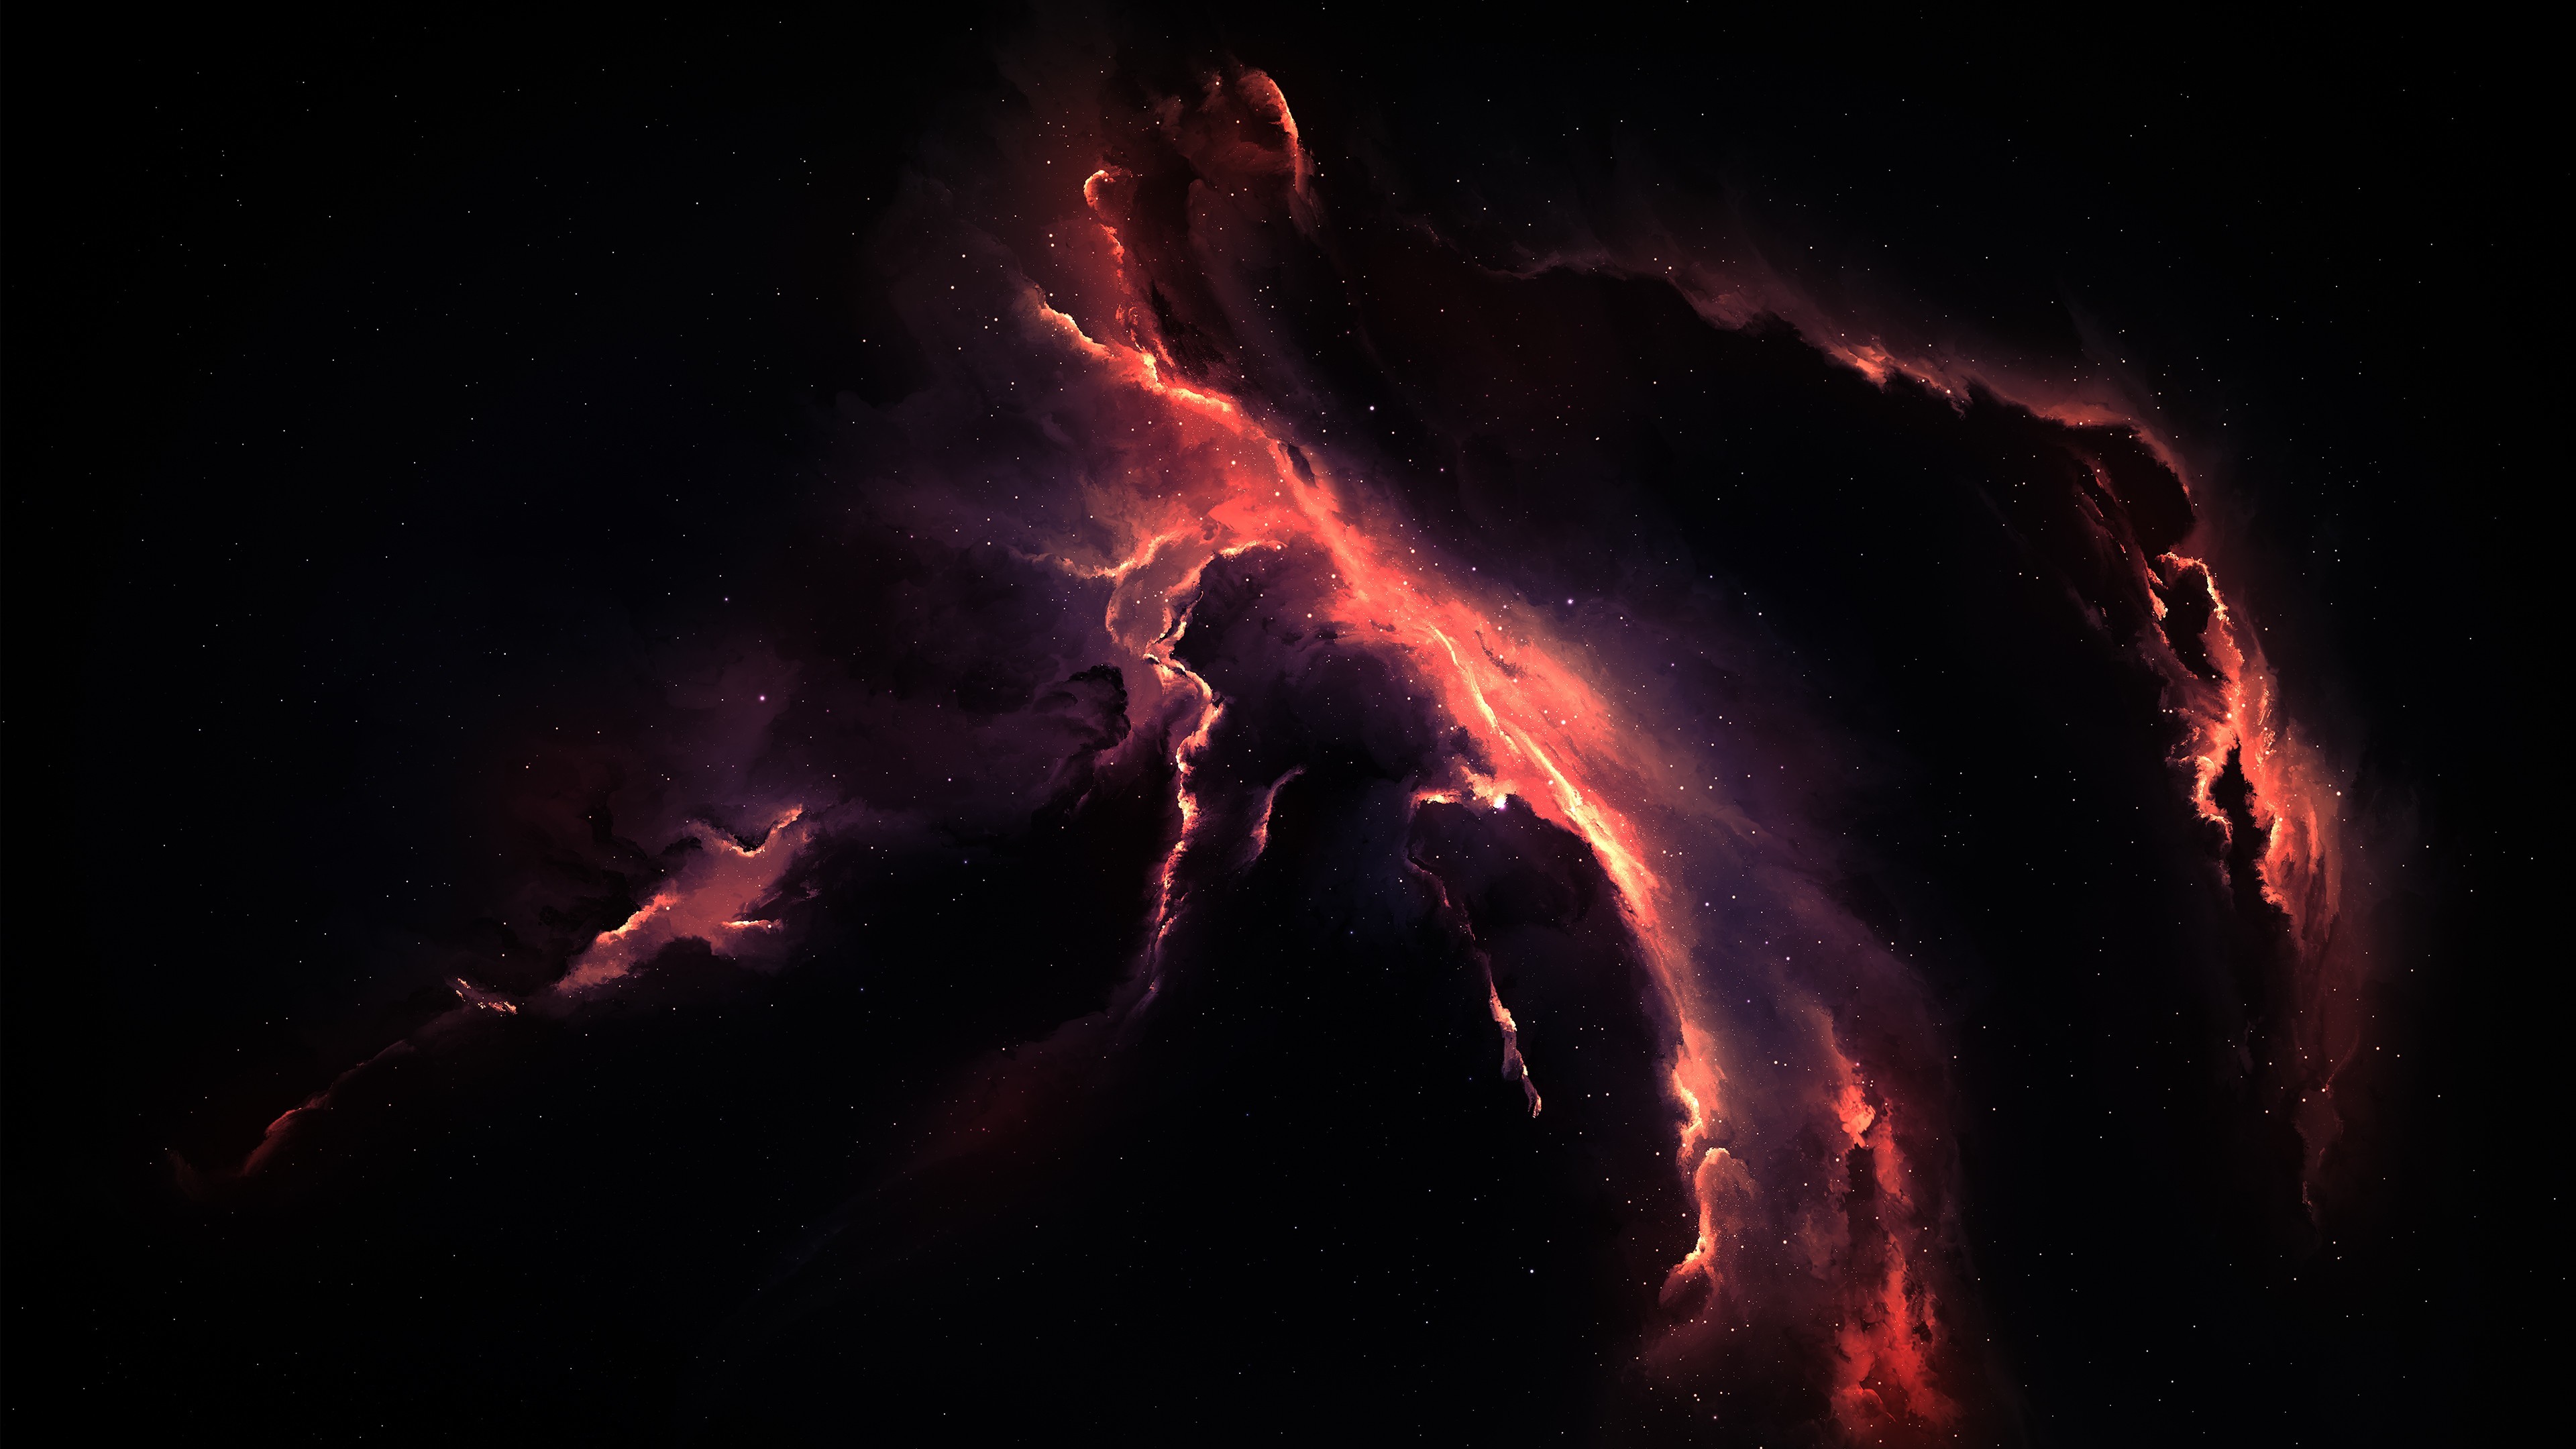 4k Space Wallpaper 48 Images 4259